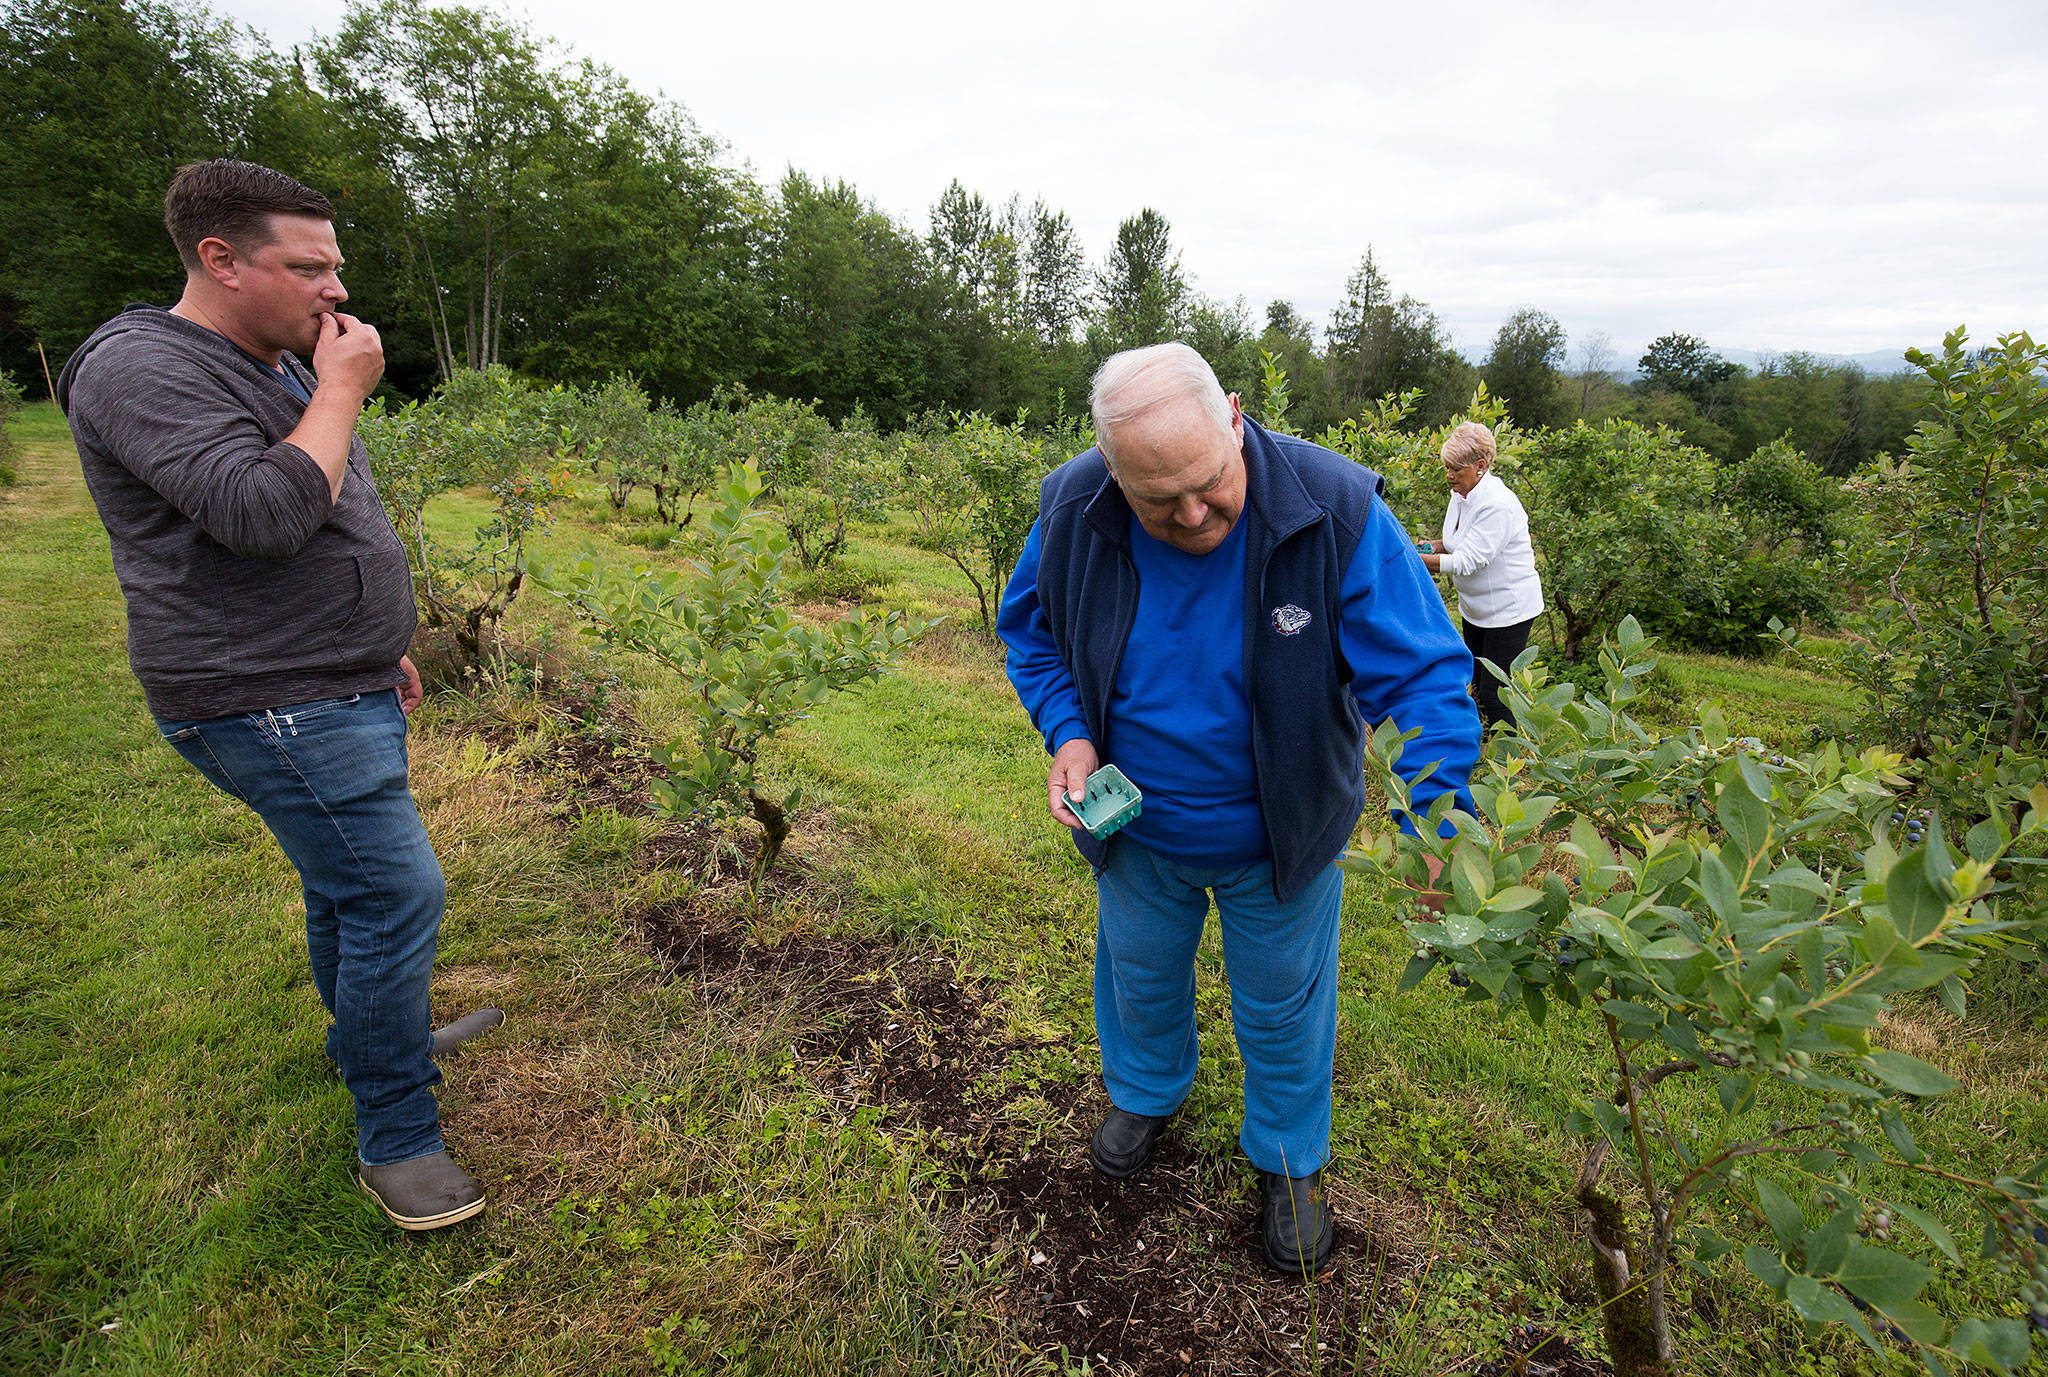 Kyle Schmidt (left) with his father, Bill, and mother, Susie, pick and eat ripening blueberries at Schmidt Blueberry Farm on Monday. (Andy Bronson / The Herald)